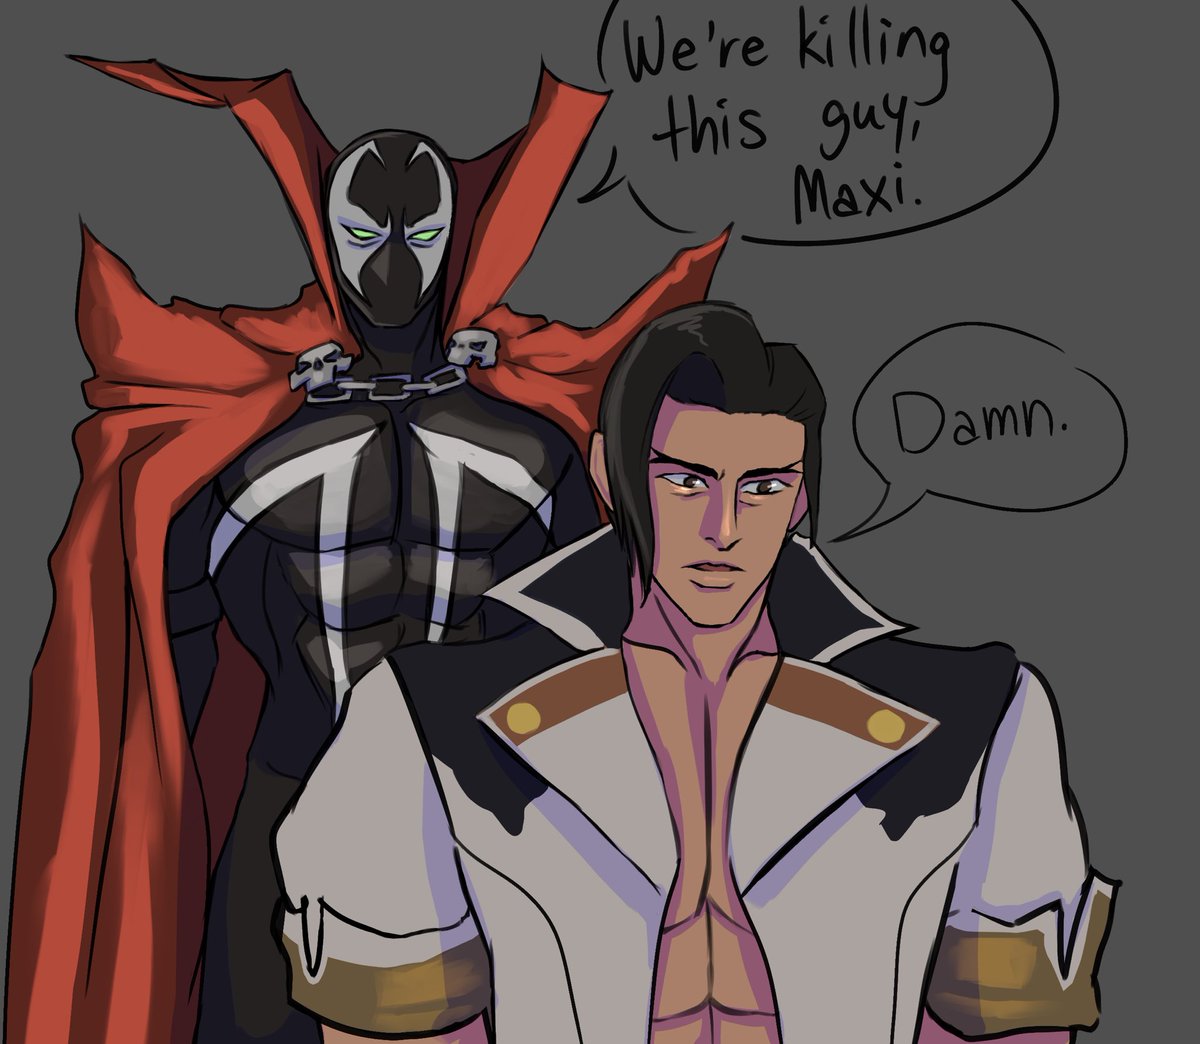 I’m late to the trend 🤧(two comfort characters w/ Steven meme) 

#memeredraw #Spawn #Maxi #soulcaliburmaxi